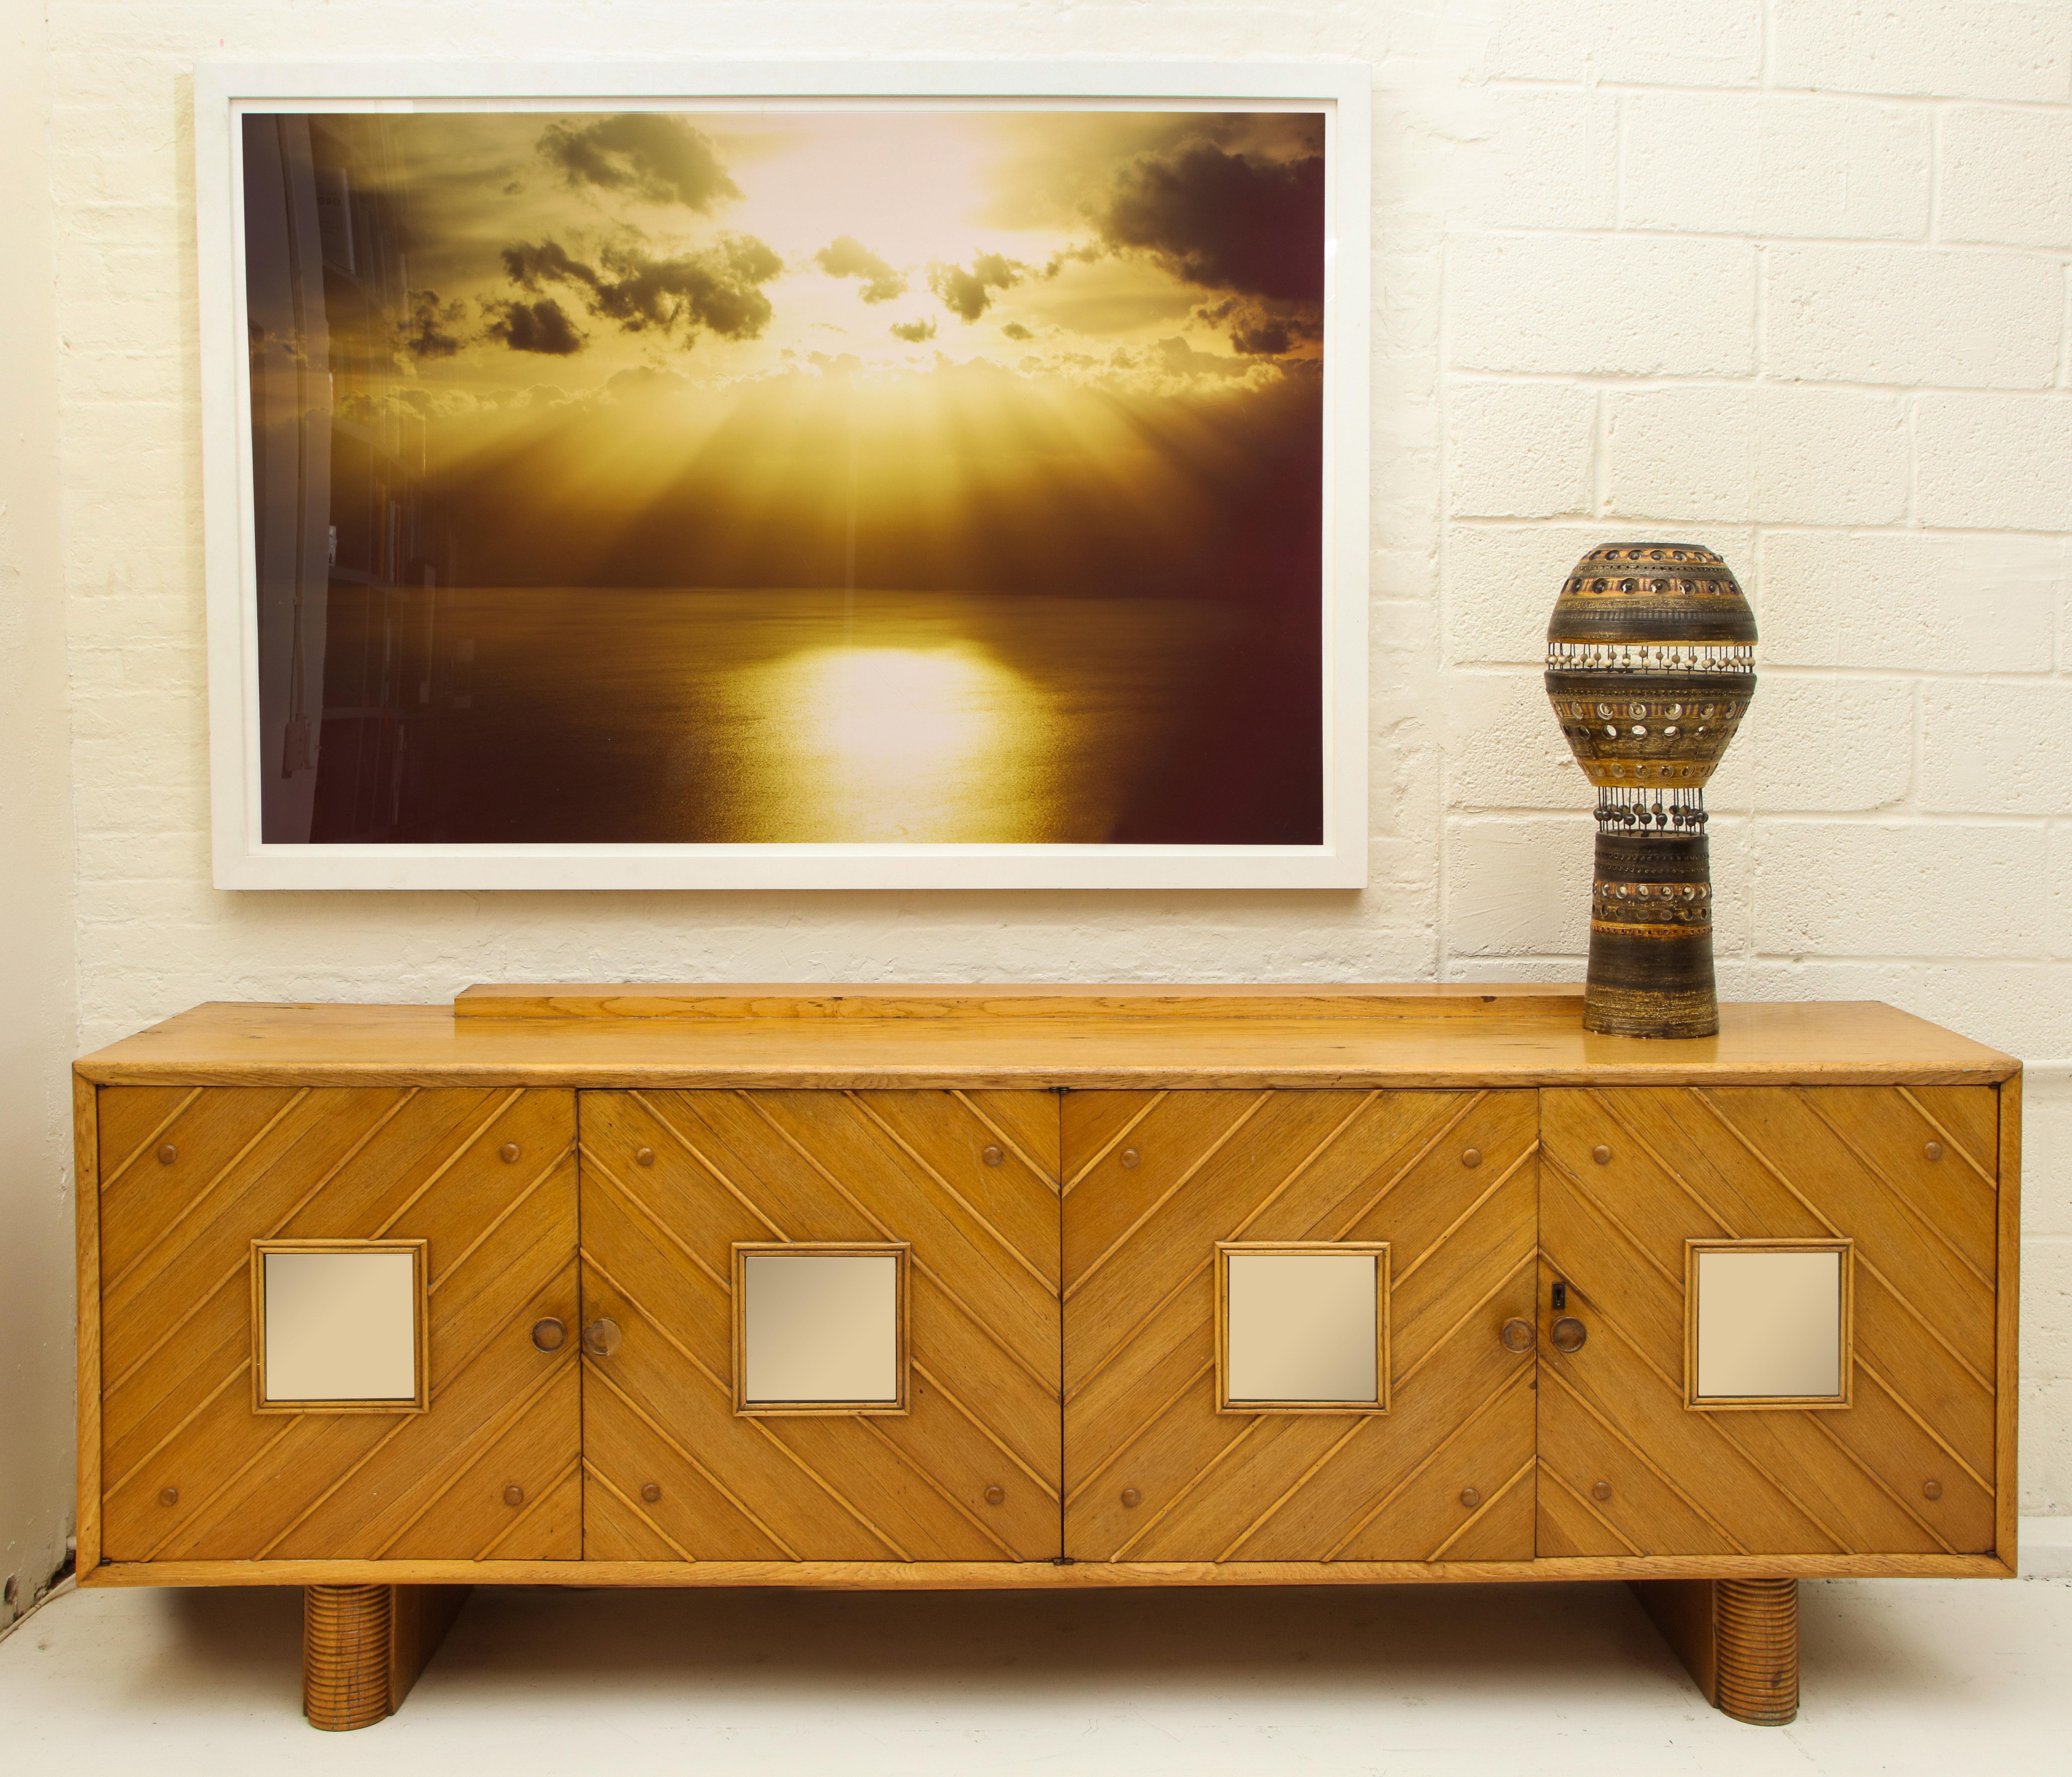 Pier luigi Colli oak sideboard, Mid-Century Modern, Italy, 1950s

Beautiful oak sideboard. The oak has lovely patina throughout the piece. 
It is a large-scale sideboard with four doors and architectural details throughout.
Amazing oak grain